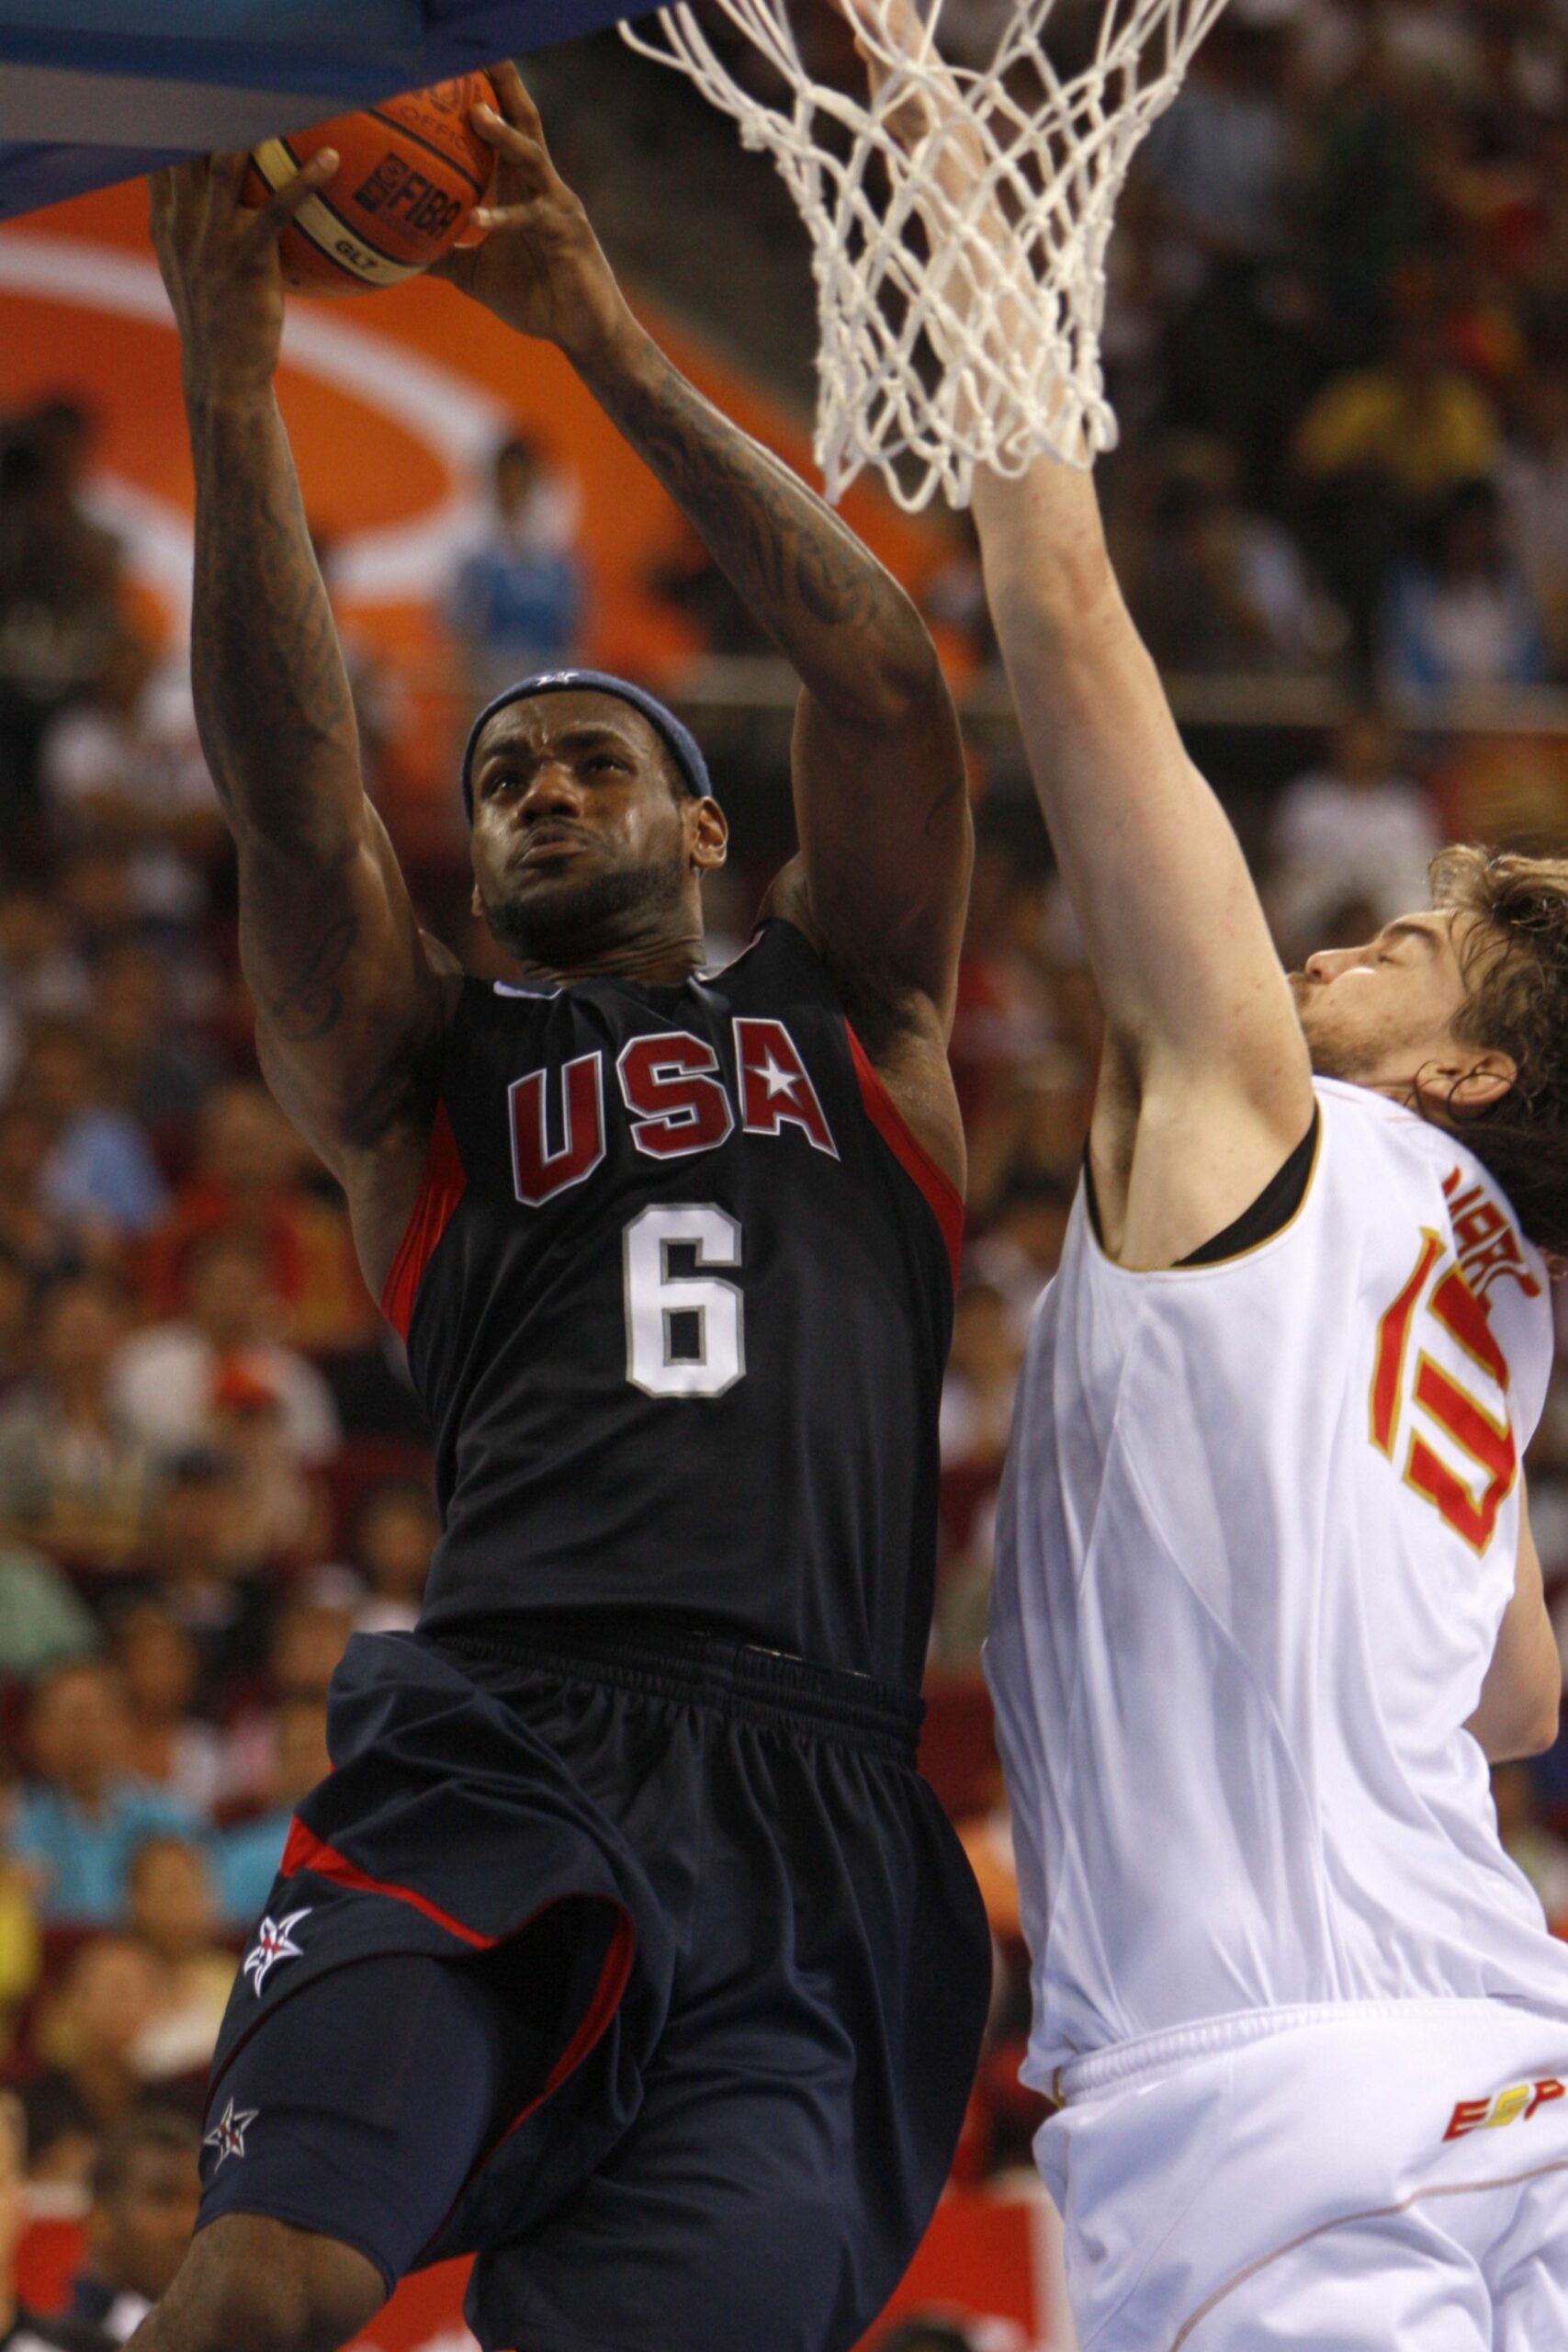 Lebron James of the U.S., left, goes up for a basket against Marc Gasol of Spain, in the final game of the men's basketball event on the final day of the 2008 Beijing Olympics in Beijing, China, on Sunday, Aug. 24, 2008. Kobe Bryant and his National Basketball Association colleagues defeated Spain 117-108 to reclaim the championship the U.S. lost four years ago in Athens after leading by just two points in the fourth quarter. Photographer: Nelson Ching/Bloomberg News